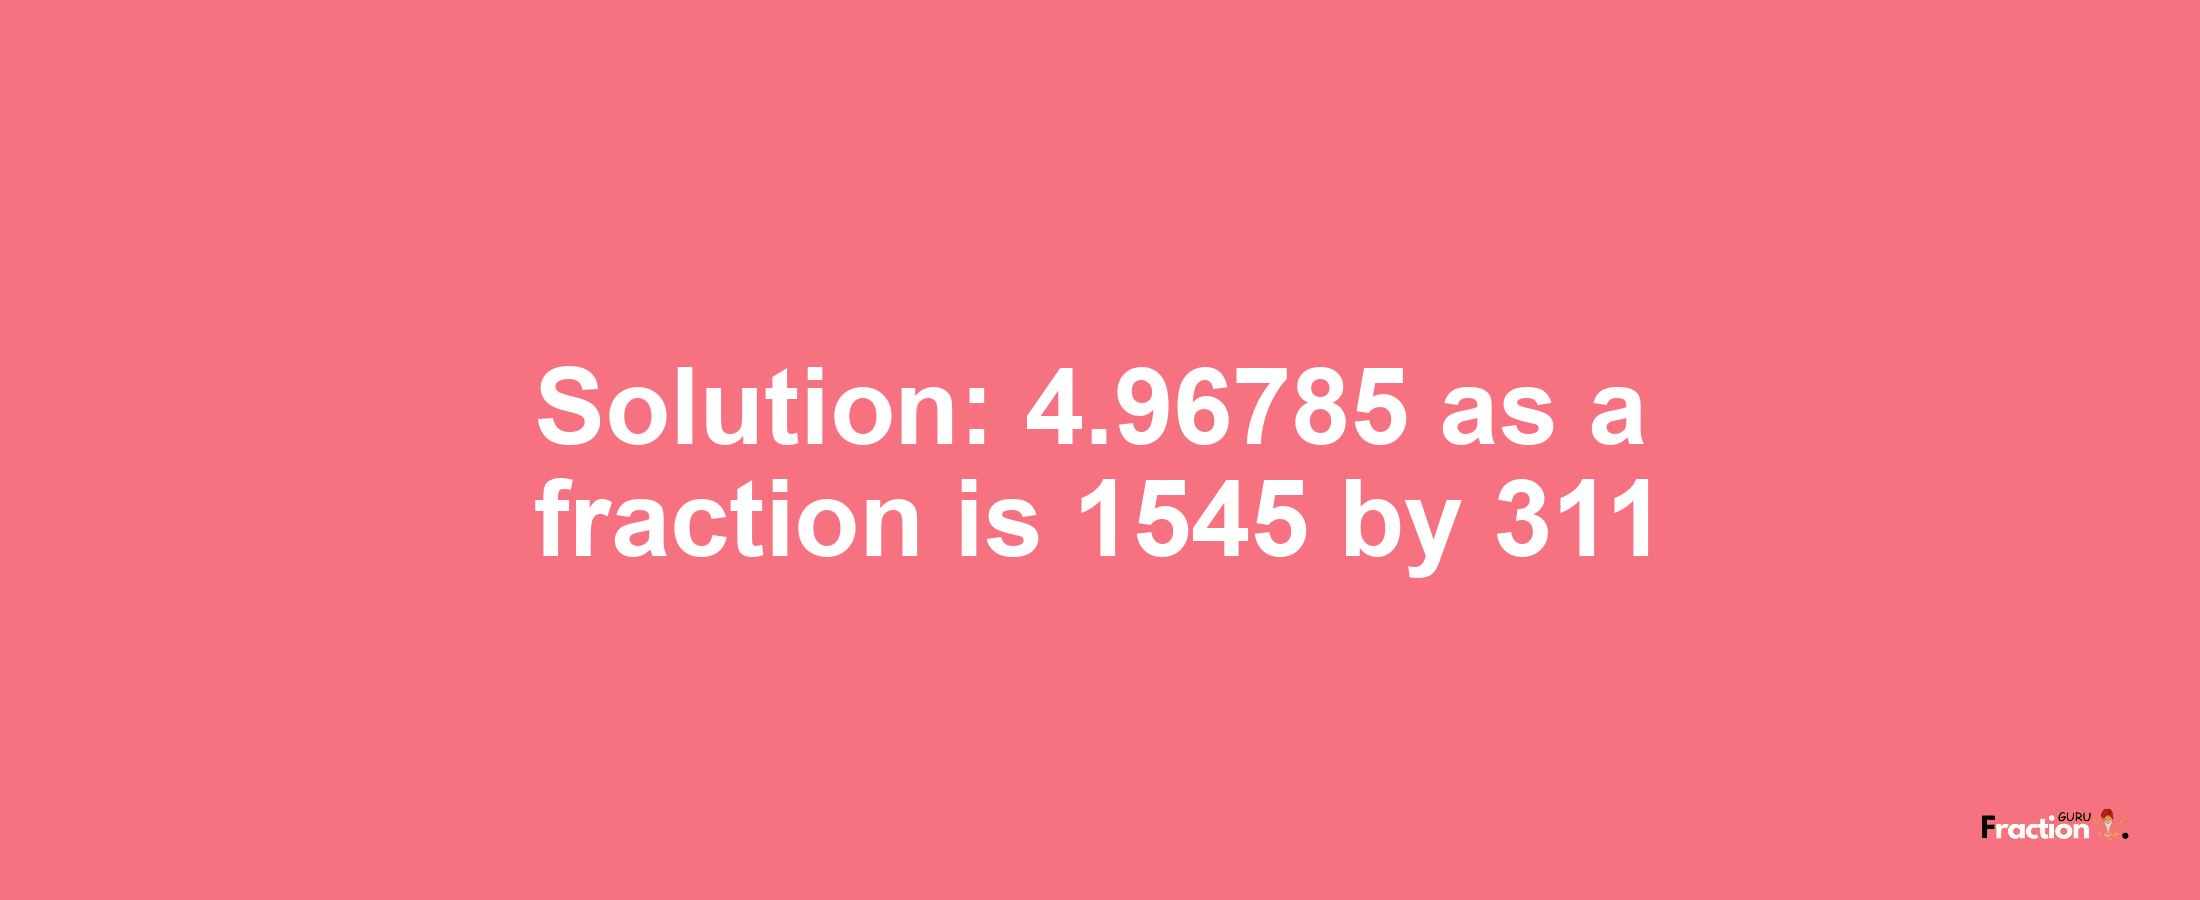 Solution:4.96785 as a fraction is 1545/311